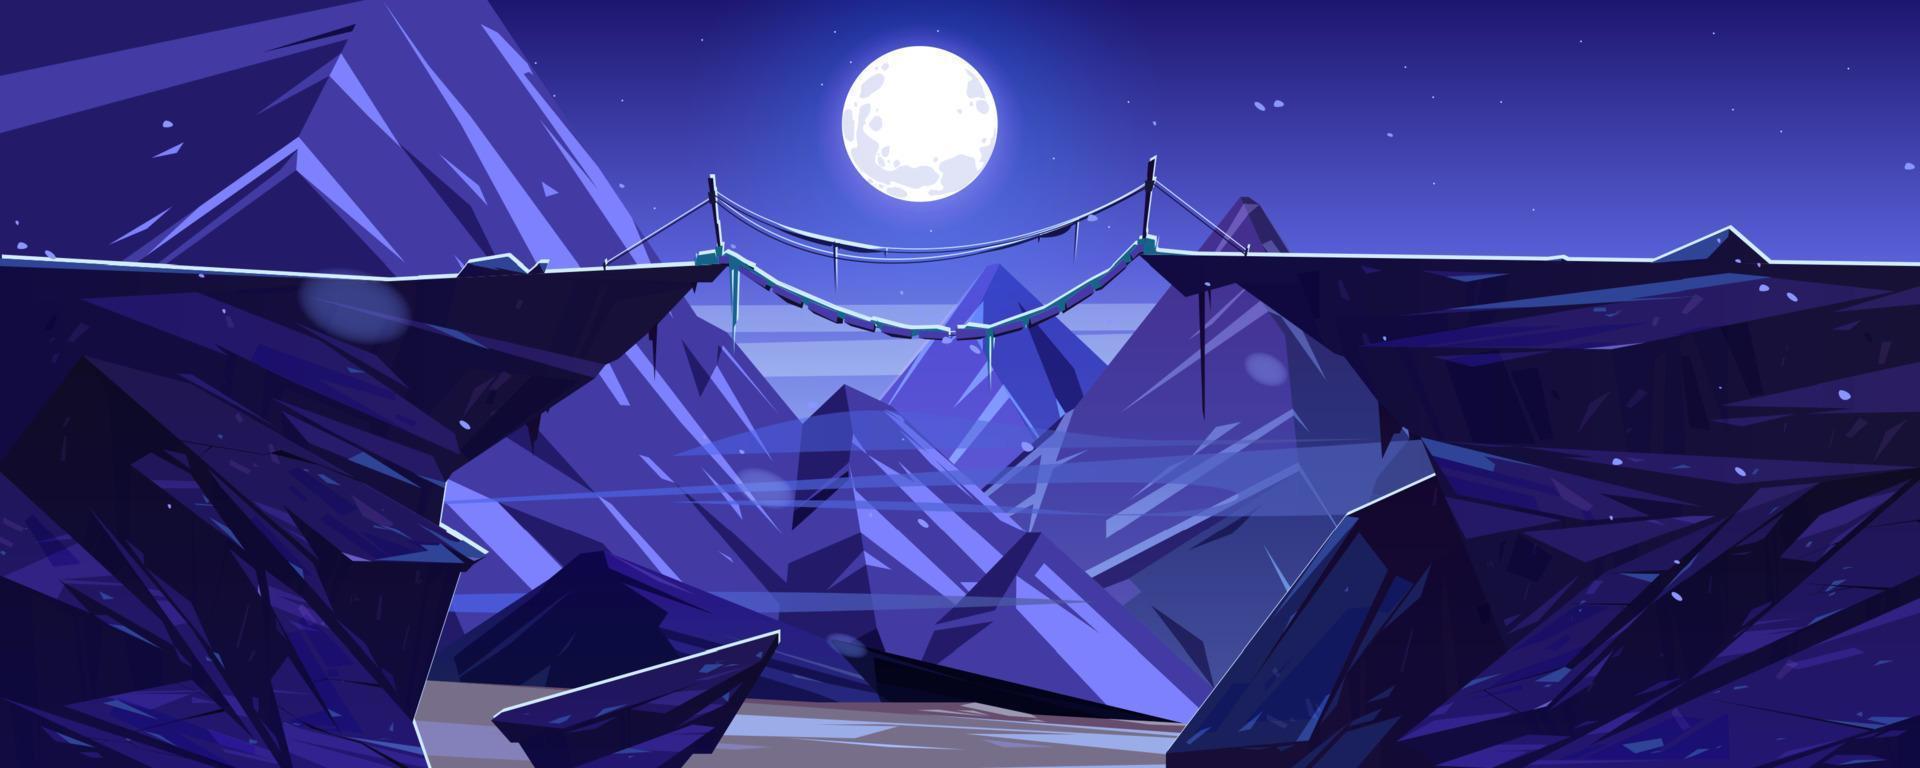 Suspended mountain bridge above cliff at night vector